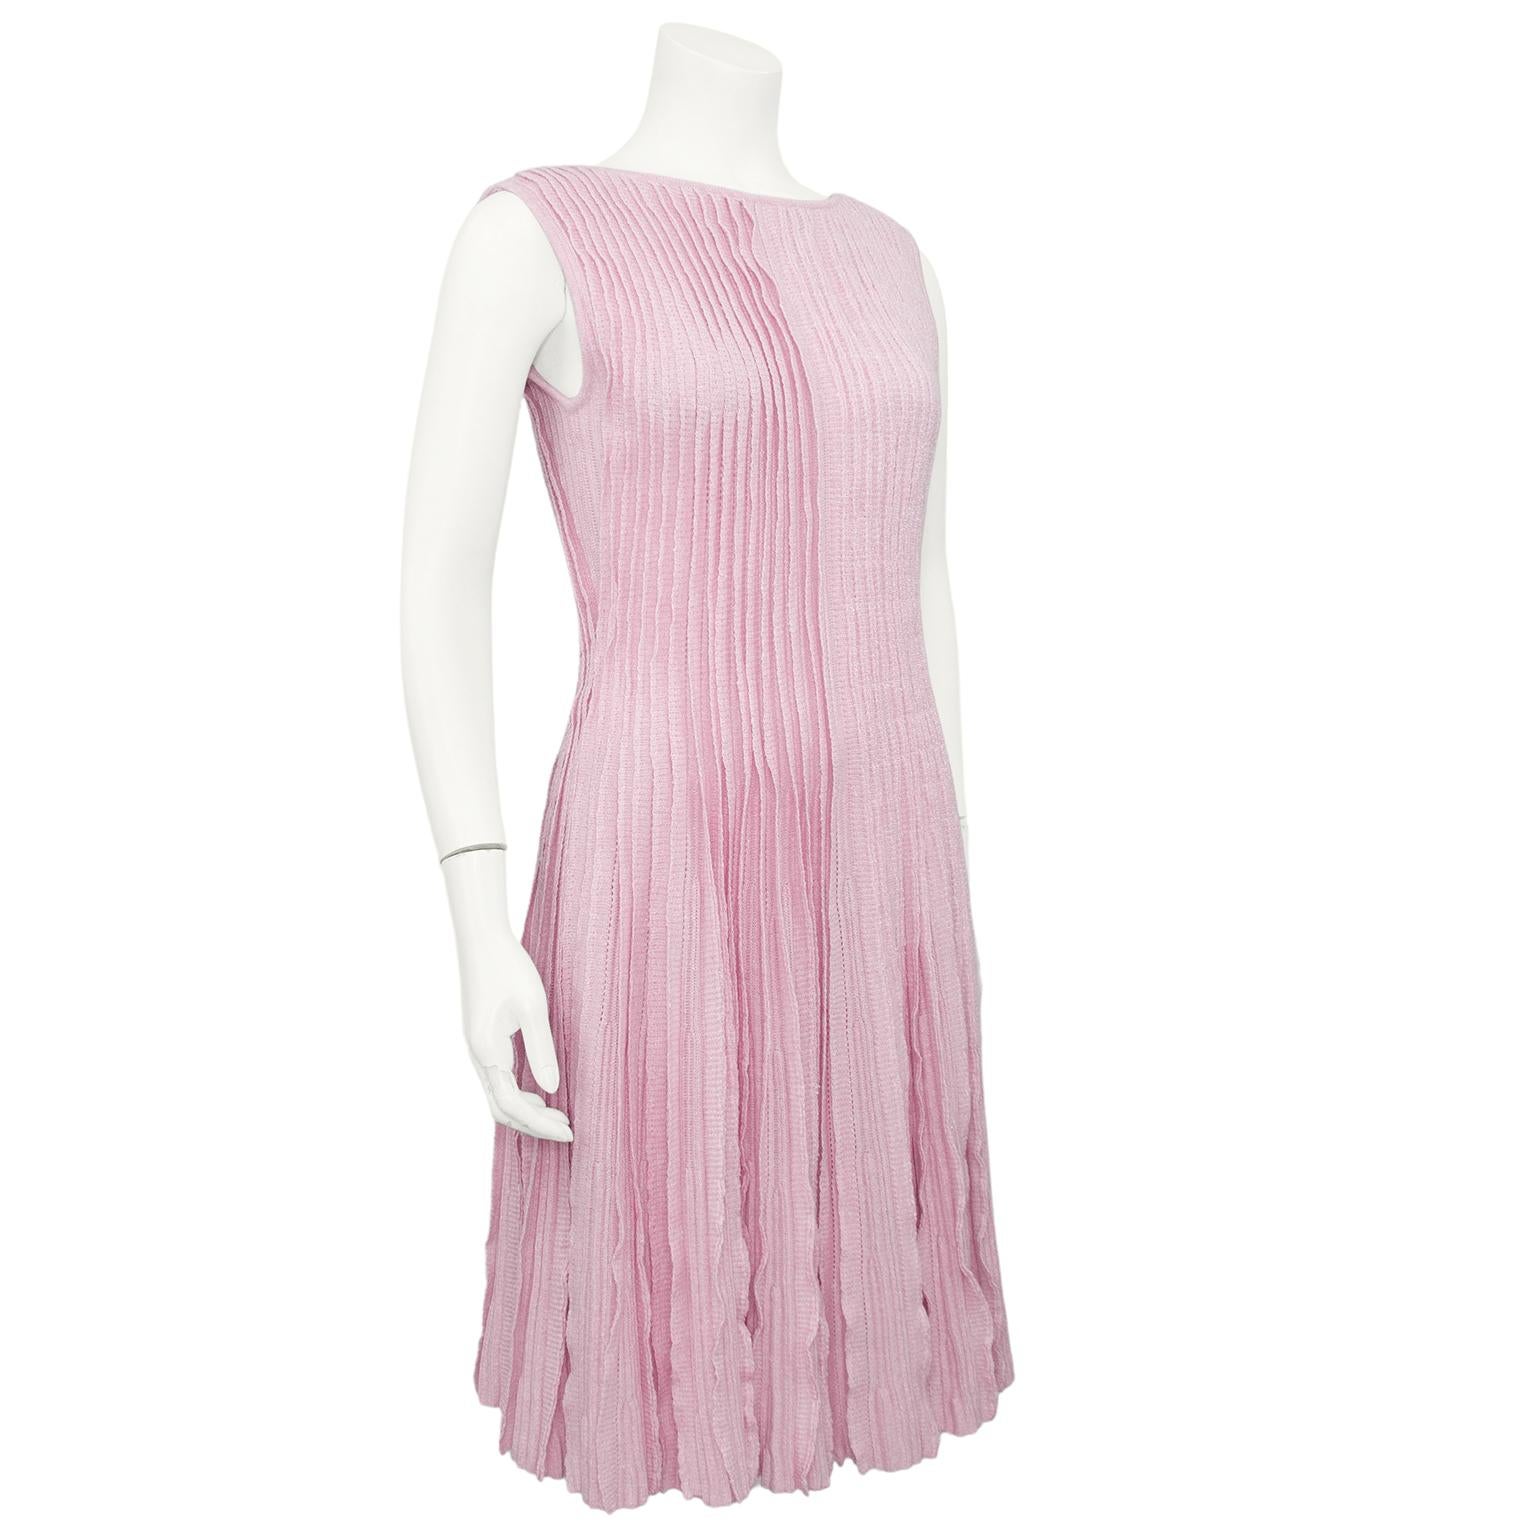 Delicate and stunning Chanel dress from 2012 in the most beautiful shade of soft pink. Boat neckline in the front with a scoop in the back. Sleeveless and skater style that is fitted through the body and a full skirt with lots of movement. 50%